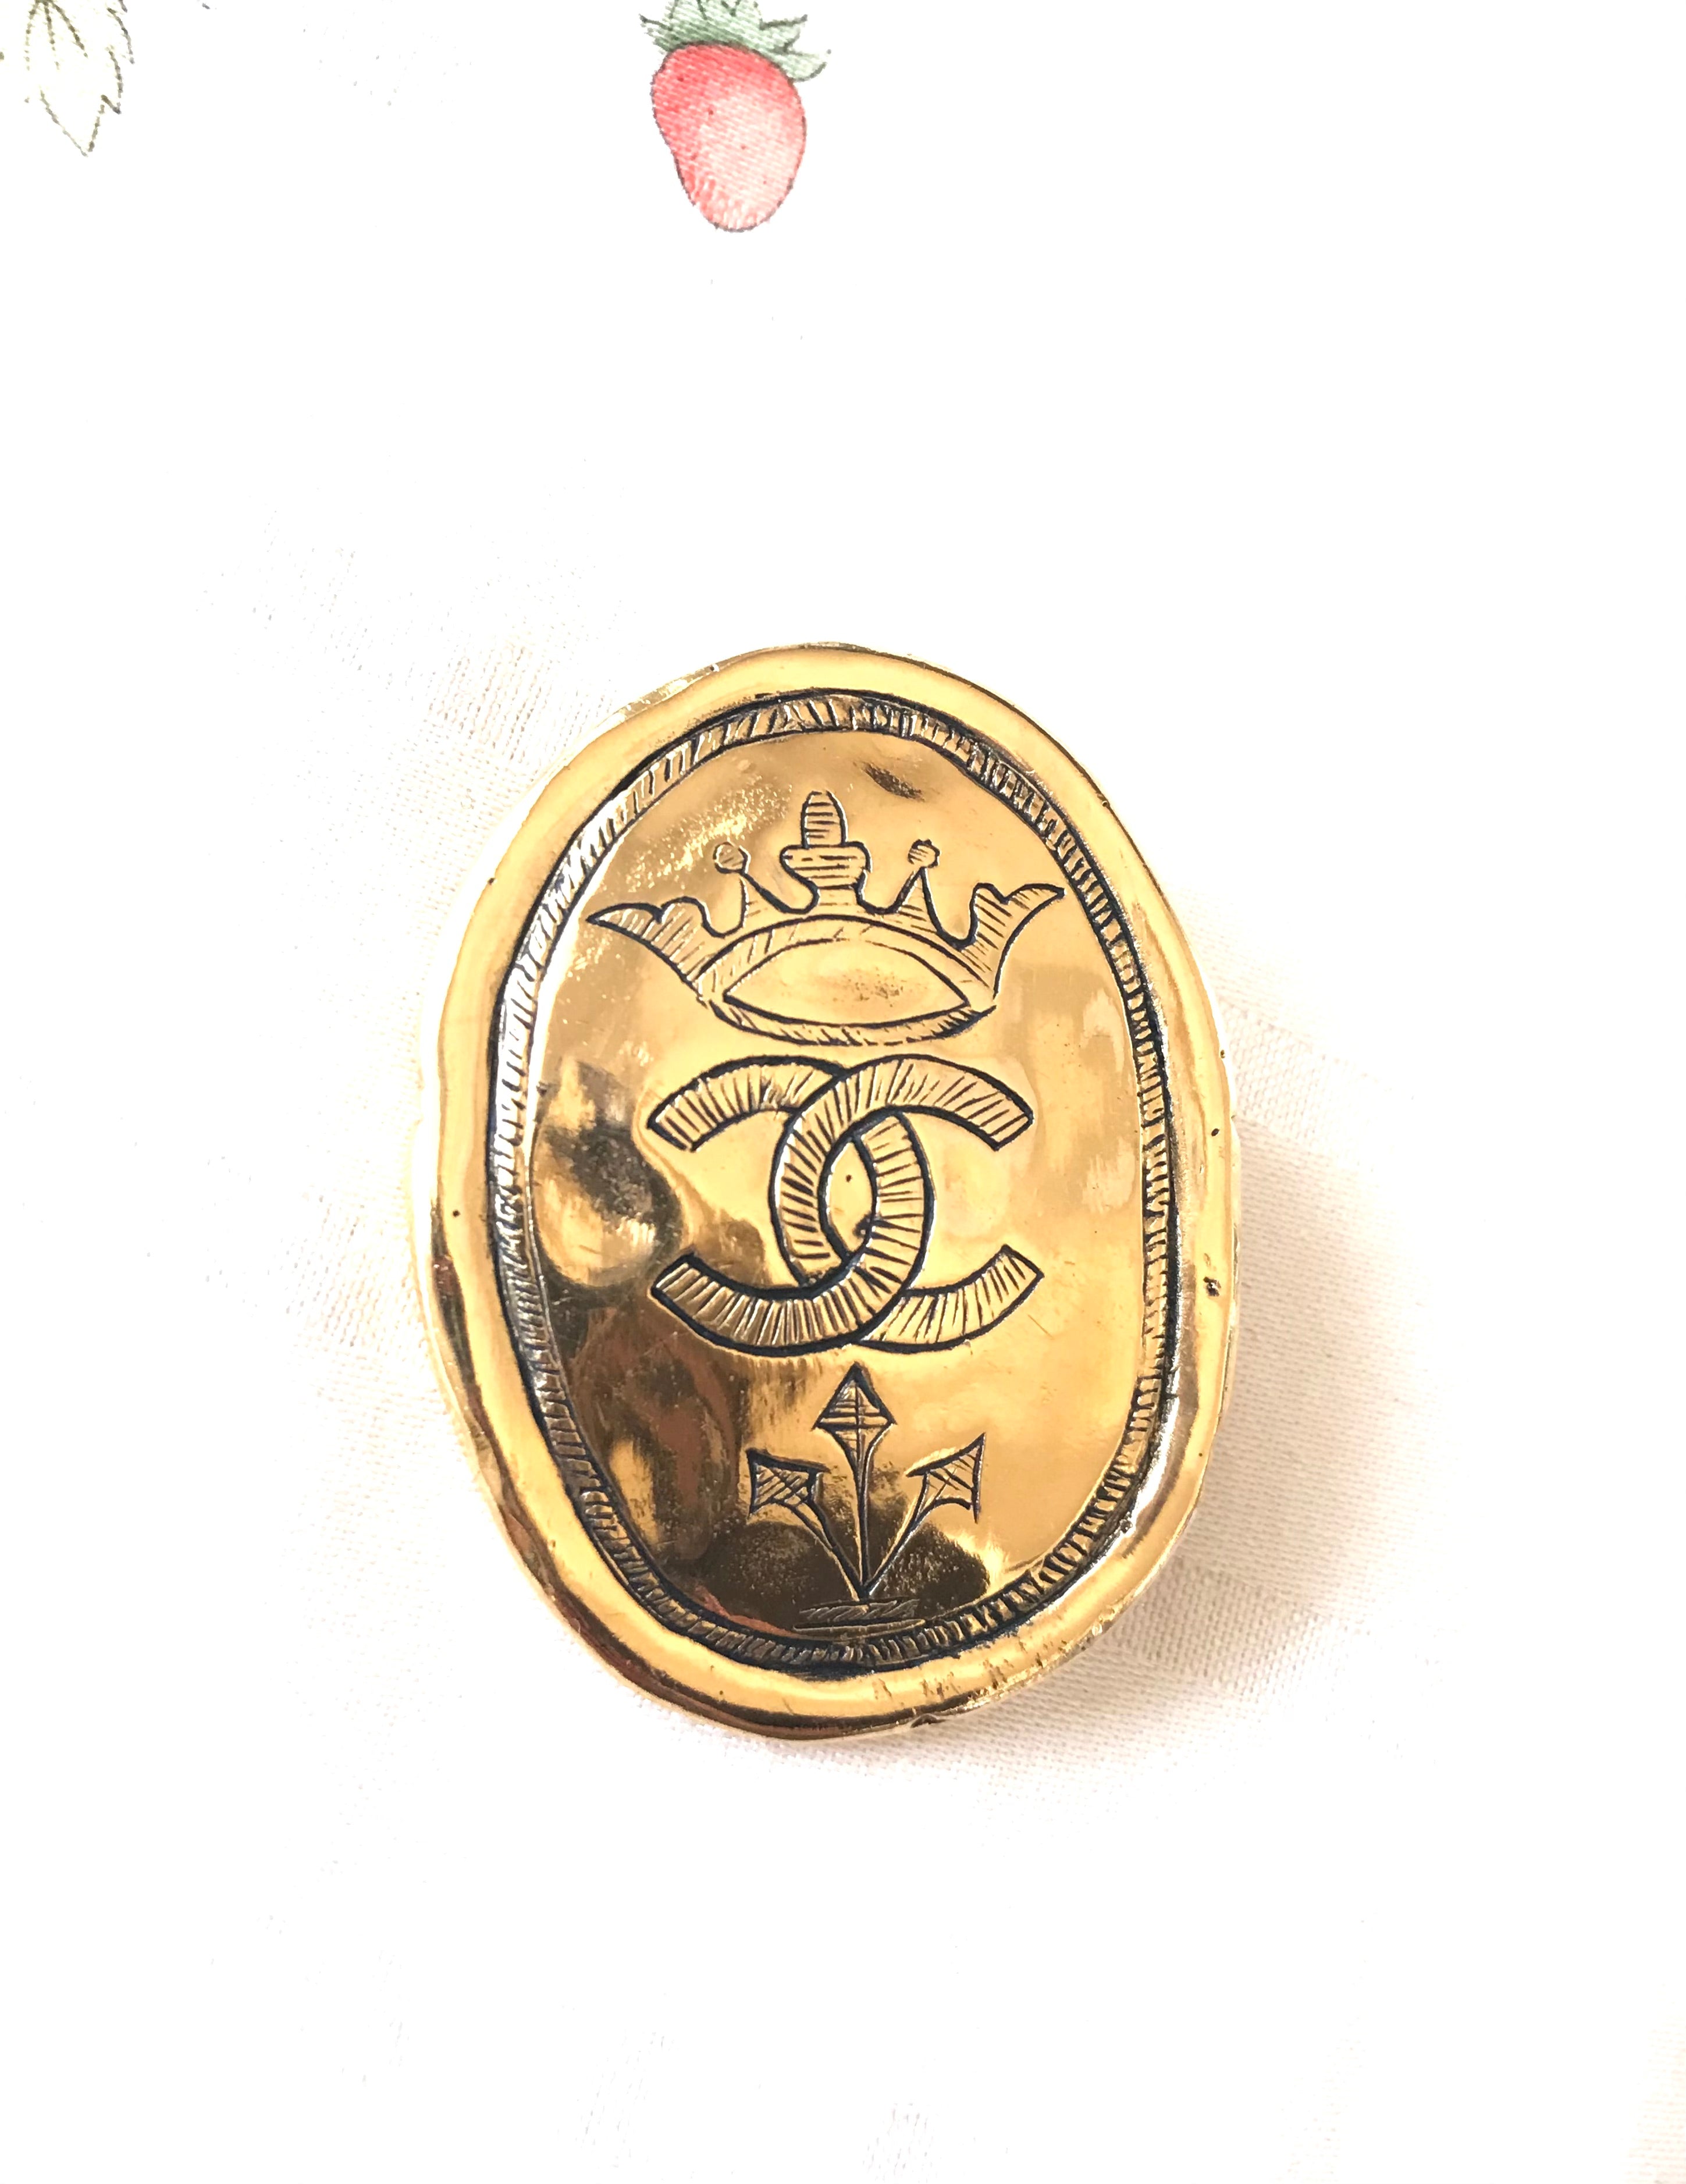 Vintage CHANEL gold tone large brooch in oval coin shape with CC logo and crown embossed motif. Rare masterpiece jewelry. Best gift